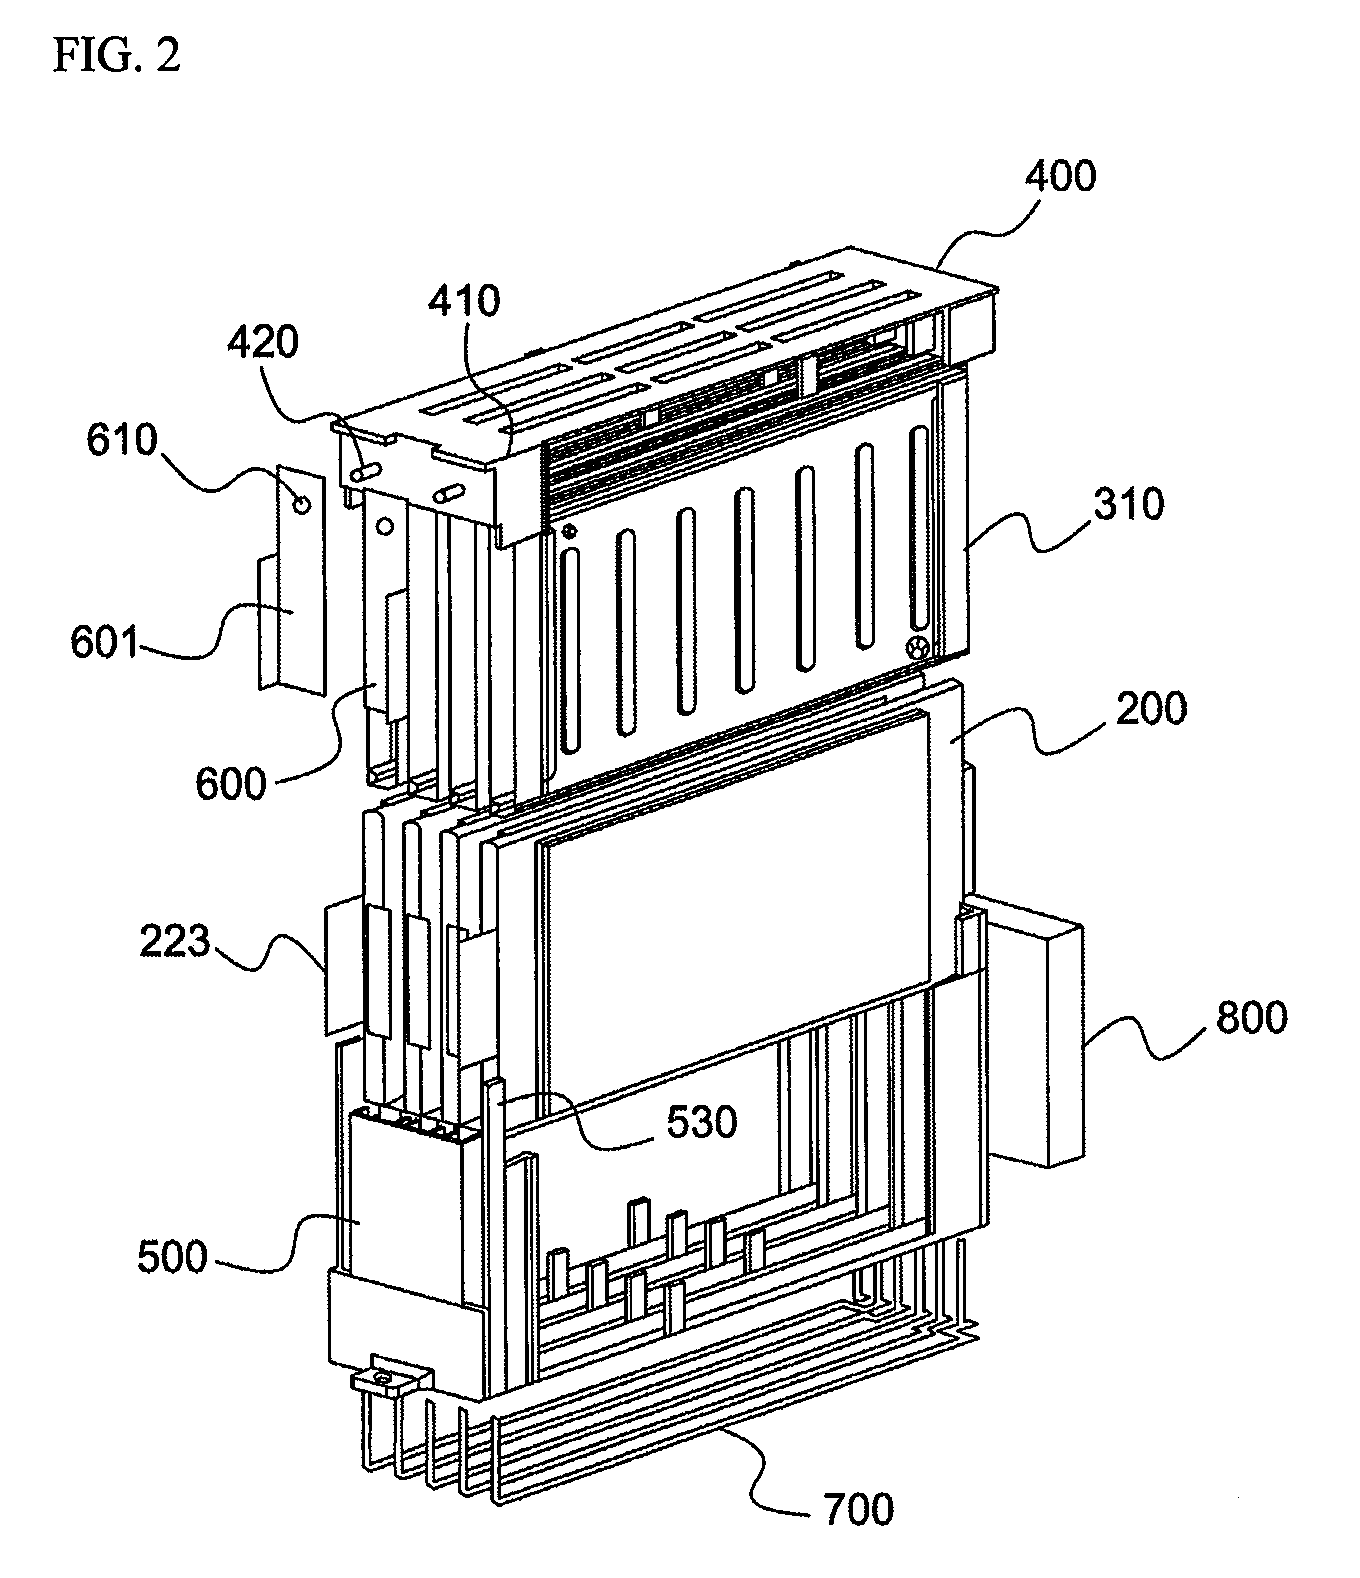 Middle or large-sized battery module